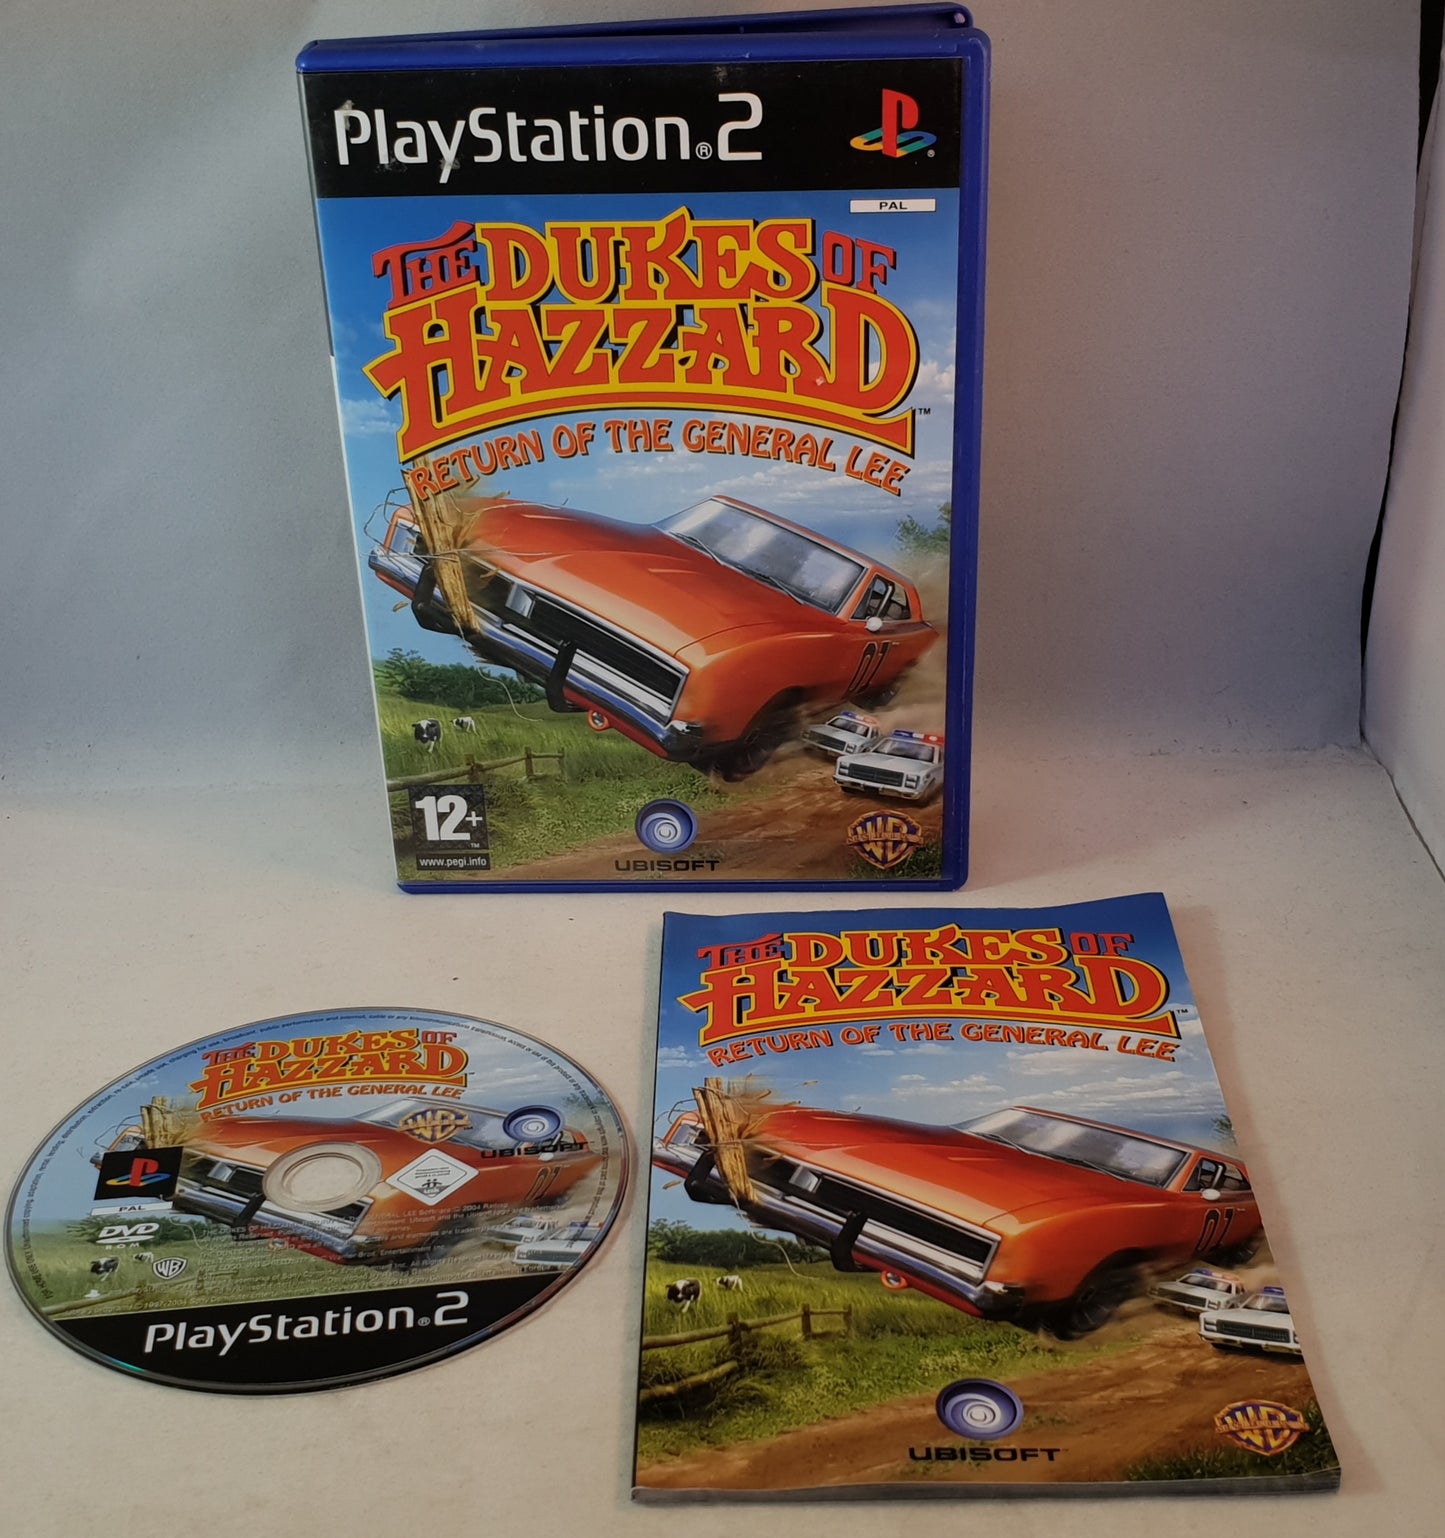 The Dukes of Hazzard Return of the General Lee Sony Playstation 2 (PS2) Game